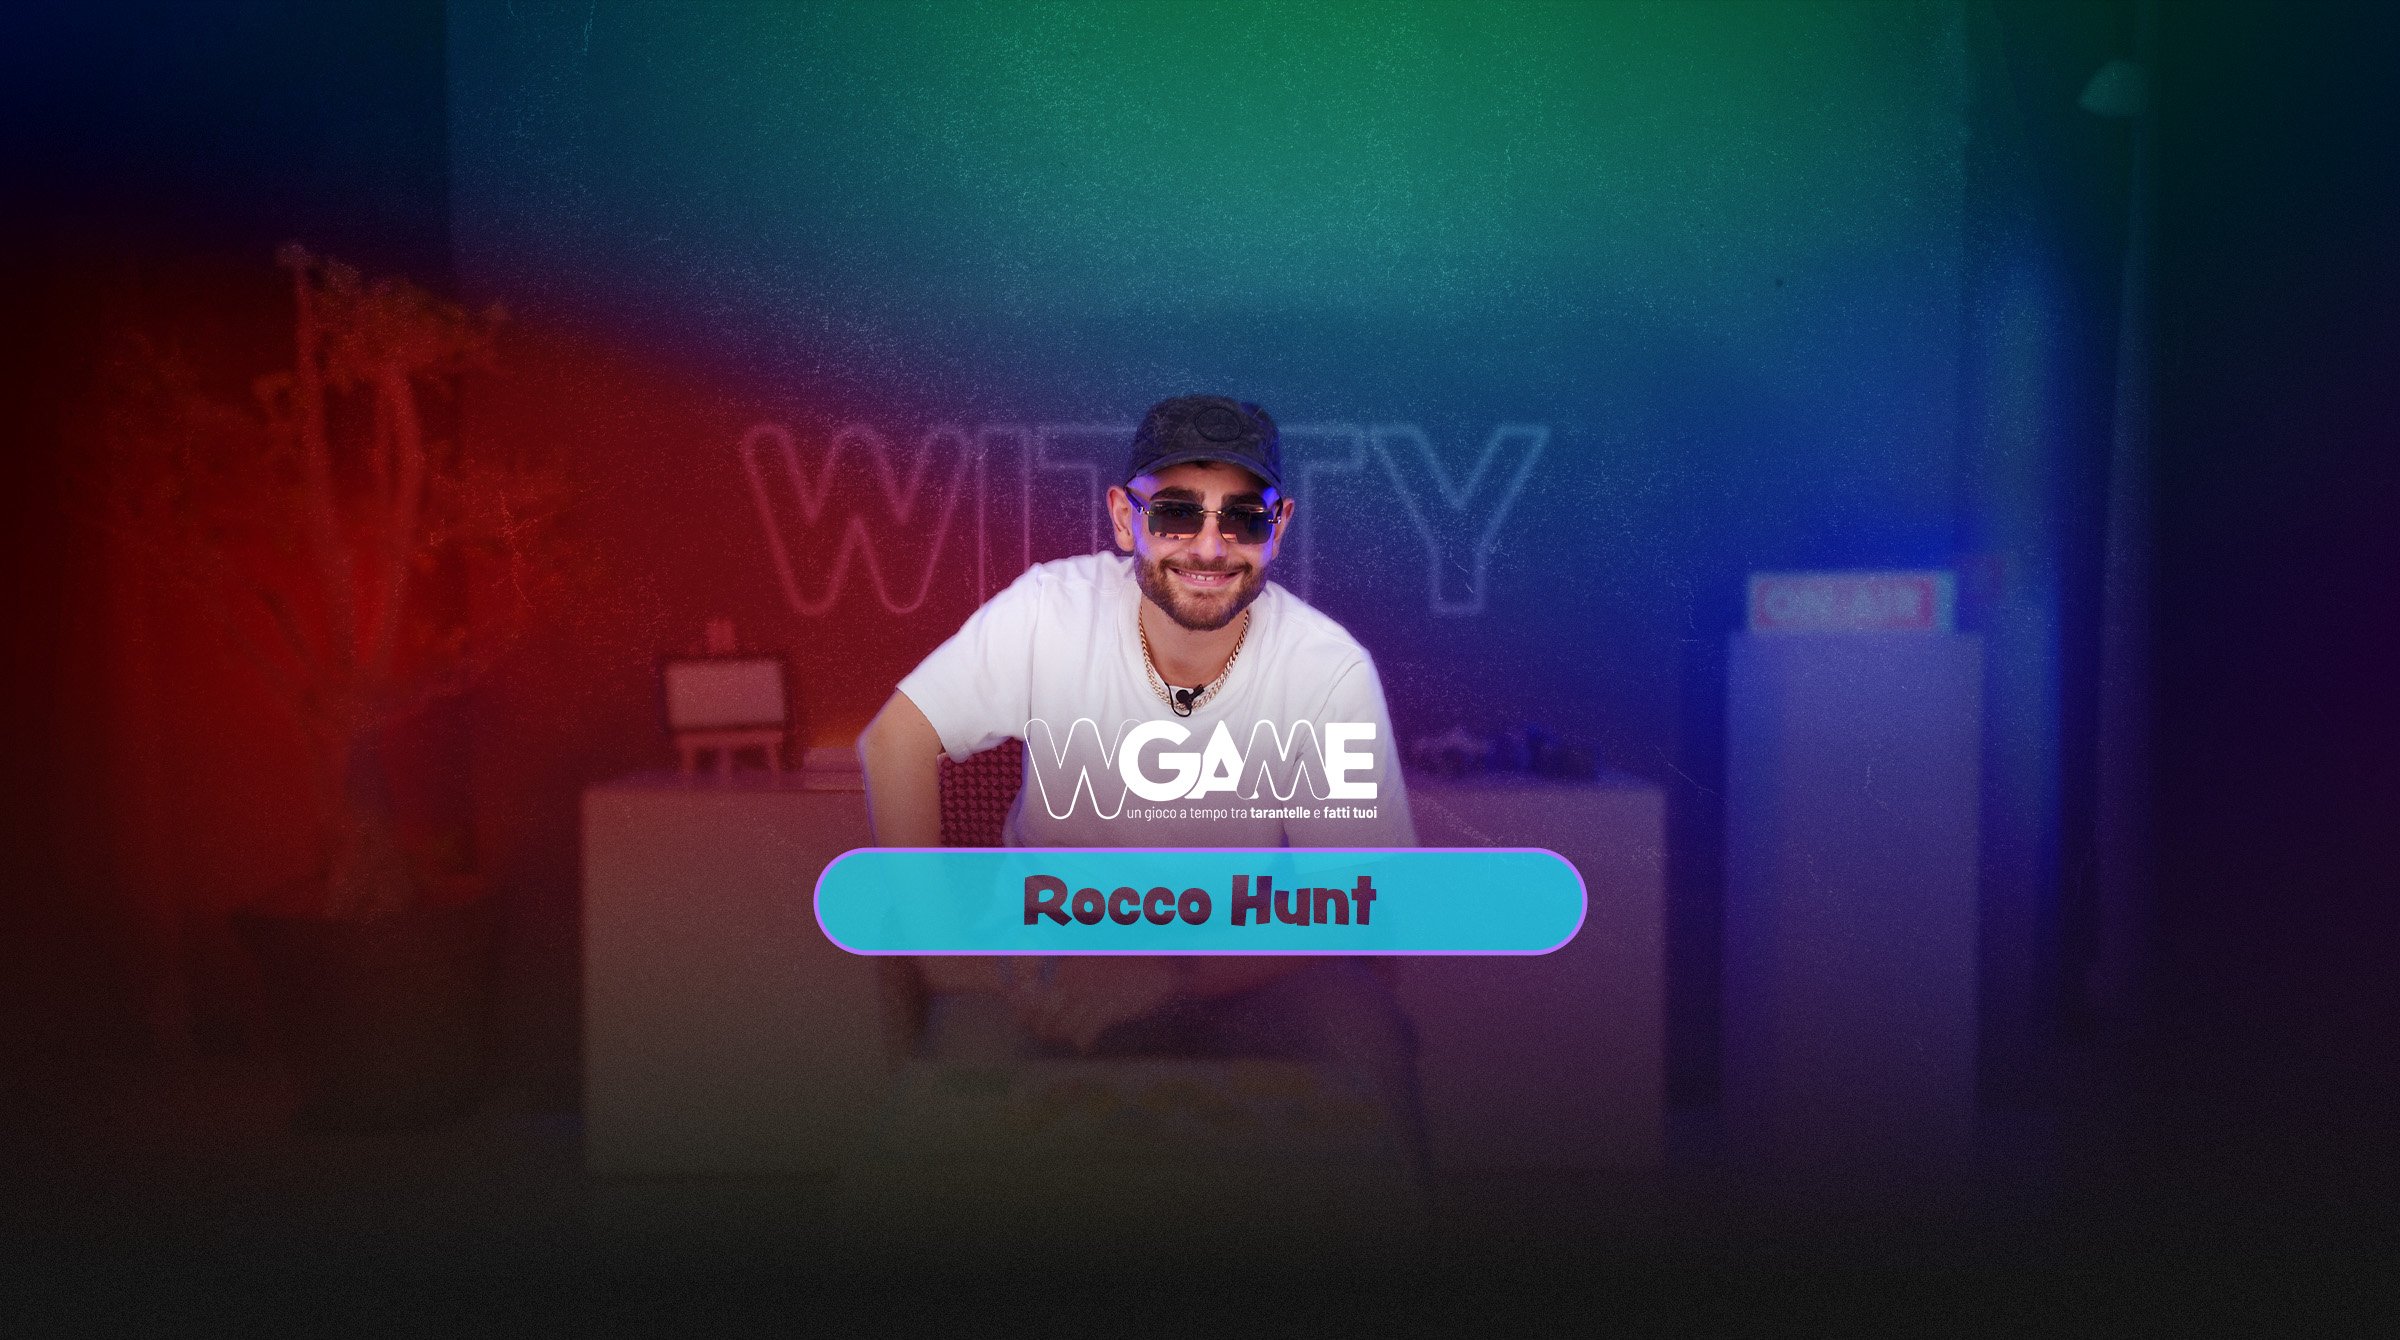 WITTY_W Game Rocco Hunt SLIDER